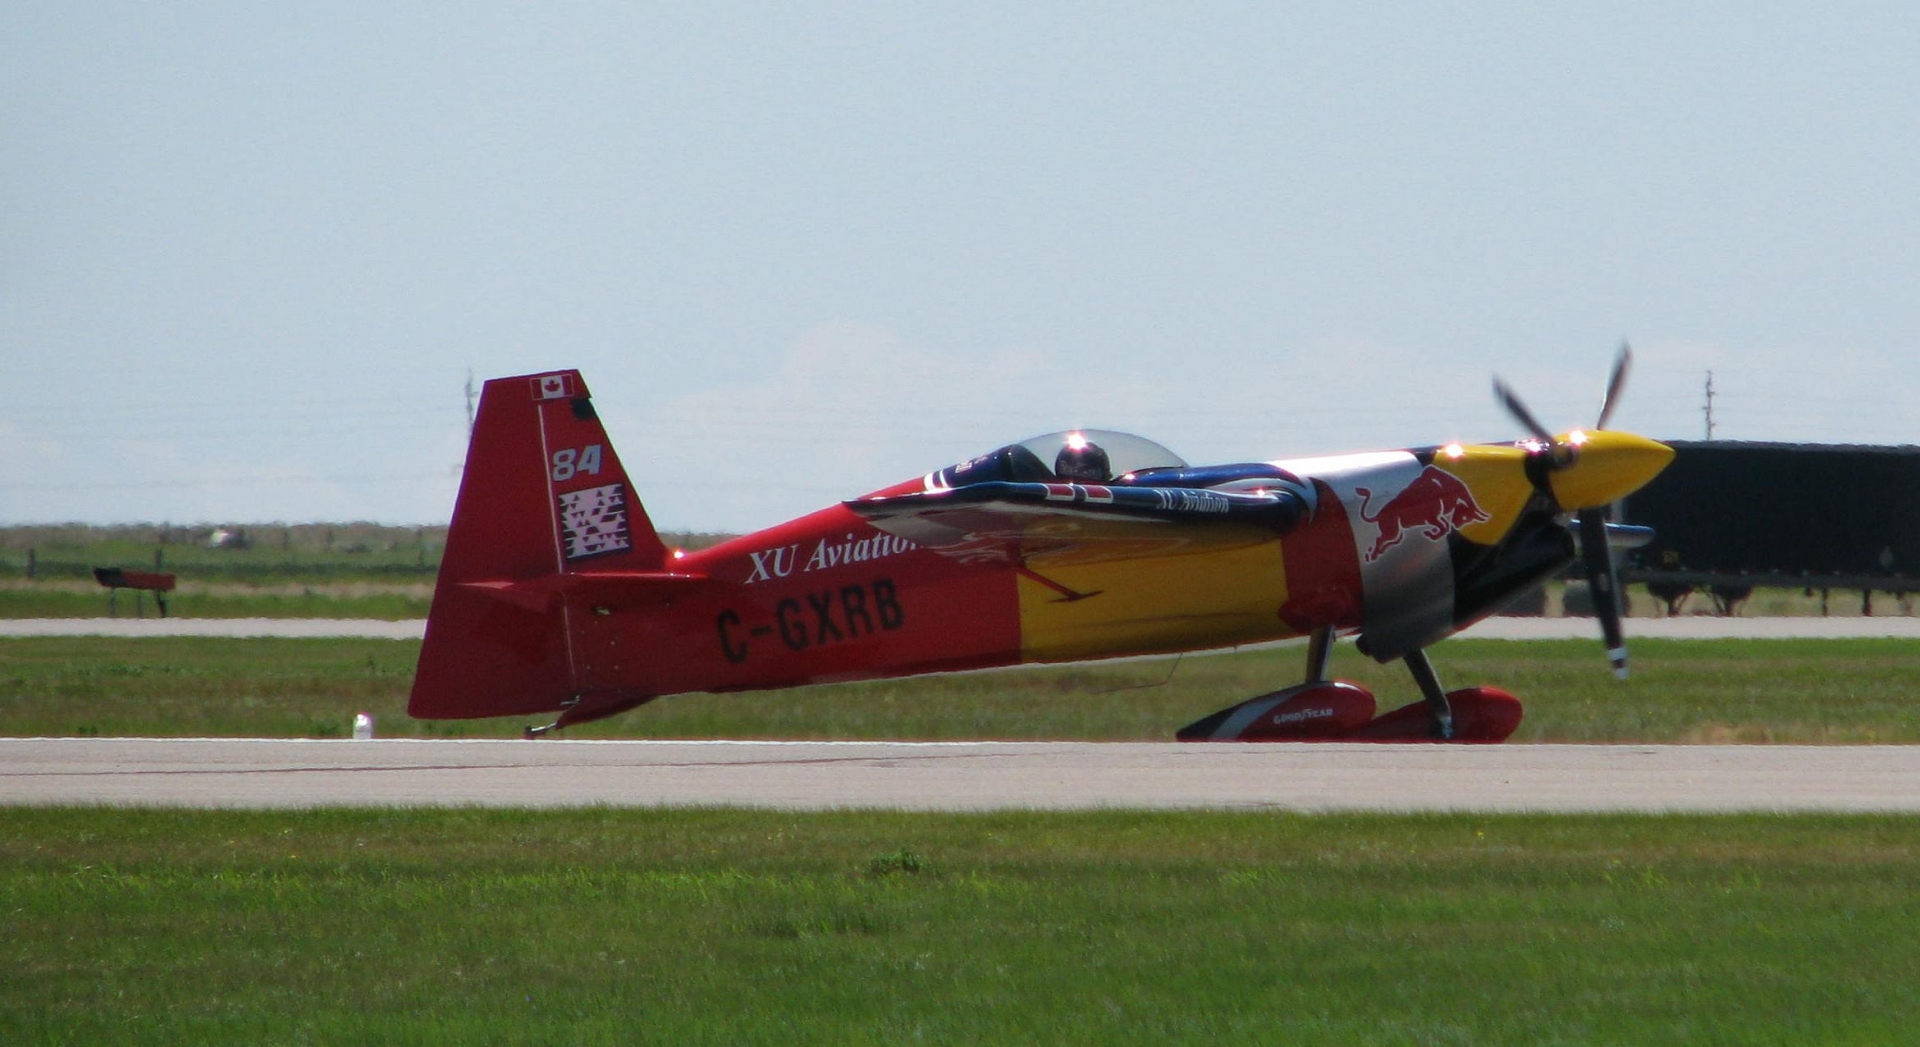 Edge540 taxying